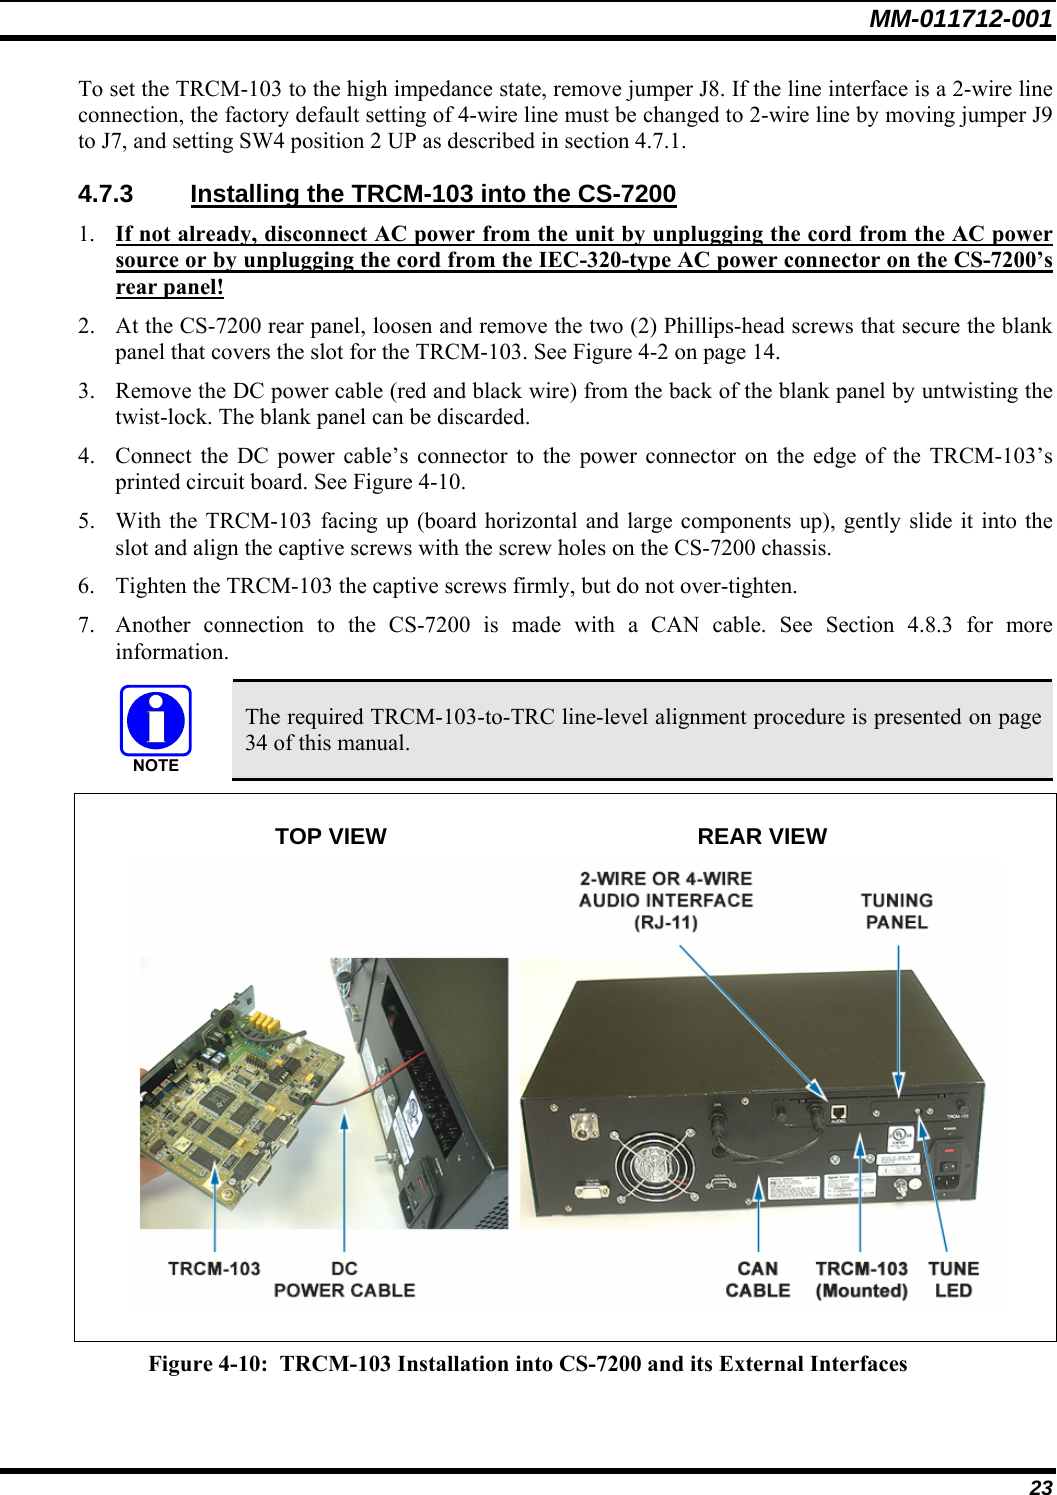 MM-011712-001 23 To set the TRCM-103 to the high impedance state, remove jumper J8. If the line interface is a 2-wire line connection, the factory default setting of 4-wire line must be changed to 2-wire line by moving jumper J9 to J7, and setting SW4 position 2 UP as described in section 4.7.1. 4.7.3  Installing the TRCM-103 into the CS-7200 1. If not already, disconnect AC power from the unit by unplugging the cord from the AC power source or by unplugging the cord from the IEC-320-type AC power connector on the CS-7200’s rear panel! 2. At the CS-7200 rear panel, loosen and remove the two (2) Phillips-head screws that secure the blank panel that covers the slot for the TRCM-103. See Figure 4-2 on page 14. 3. Remove the DC power cable (red and black wire) from the back of the blank panel by untwisting the twist-lock. The blank panel can be discarded. 4. Connect the DC power cable’s connector to the power connector on the edge of the TRCM-103’s printed circuit board. See Figure 4-10. 5. With the TRCM-103 facing up (board horizontal and large components up), gently slide it into the slot and align the captive screws with the screw holes on the CS-7200 chassis. 6. Tighten the TRCM-103 the captive screws firmly, but do not over-tighten. 7. Another connection to the CS-7200 is made with a CAN cable. See Section 4.8.3 for more information.   The required TRCM-103-to-TRC line-level alignment procedure is presented on page 34 of this manual.   TOP VIEW  REAR VIEW   Figure 4-10:  TRCM-103 Installation into CS-7200 and its External Interfaces 